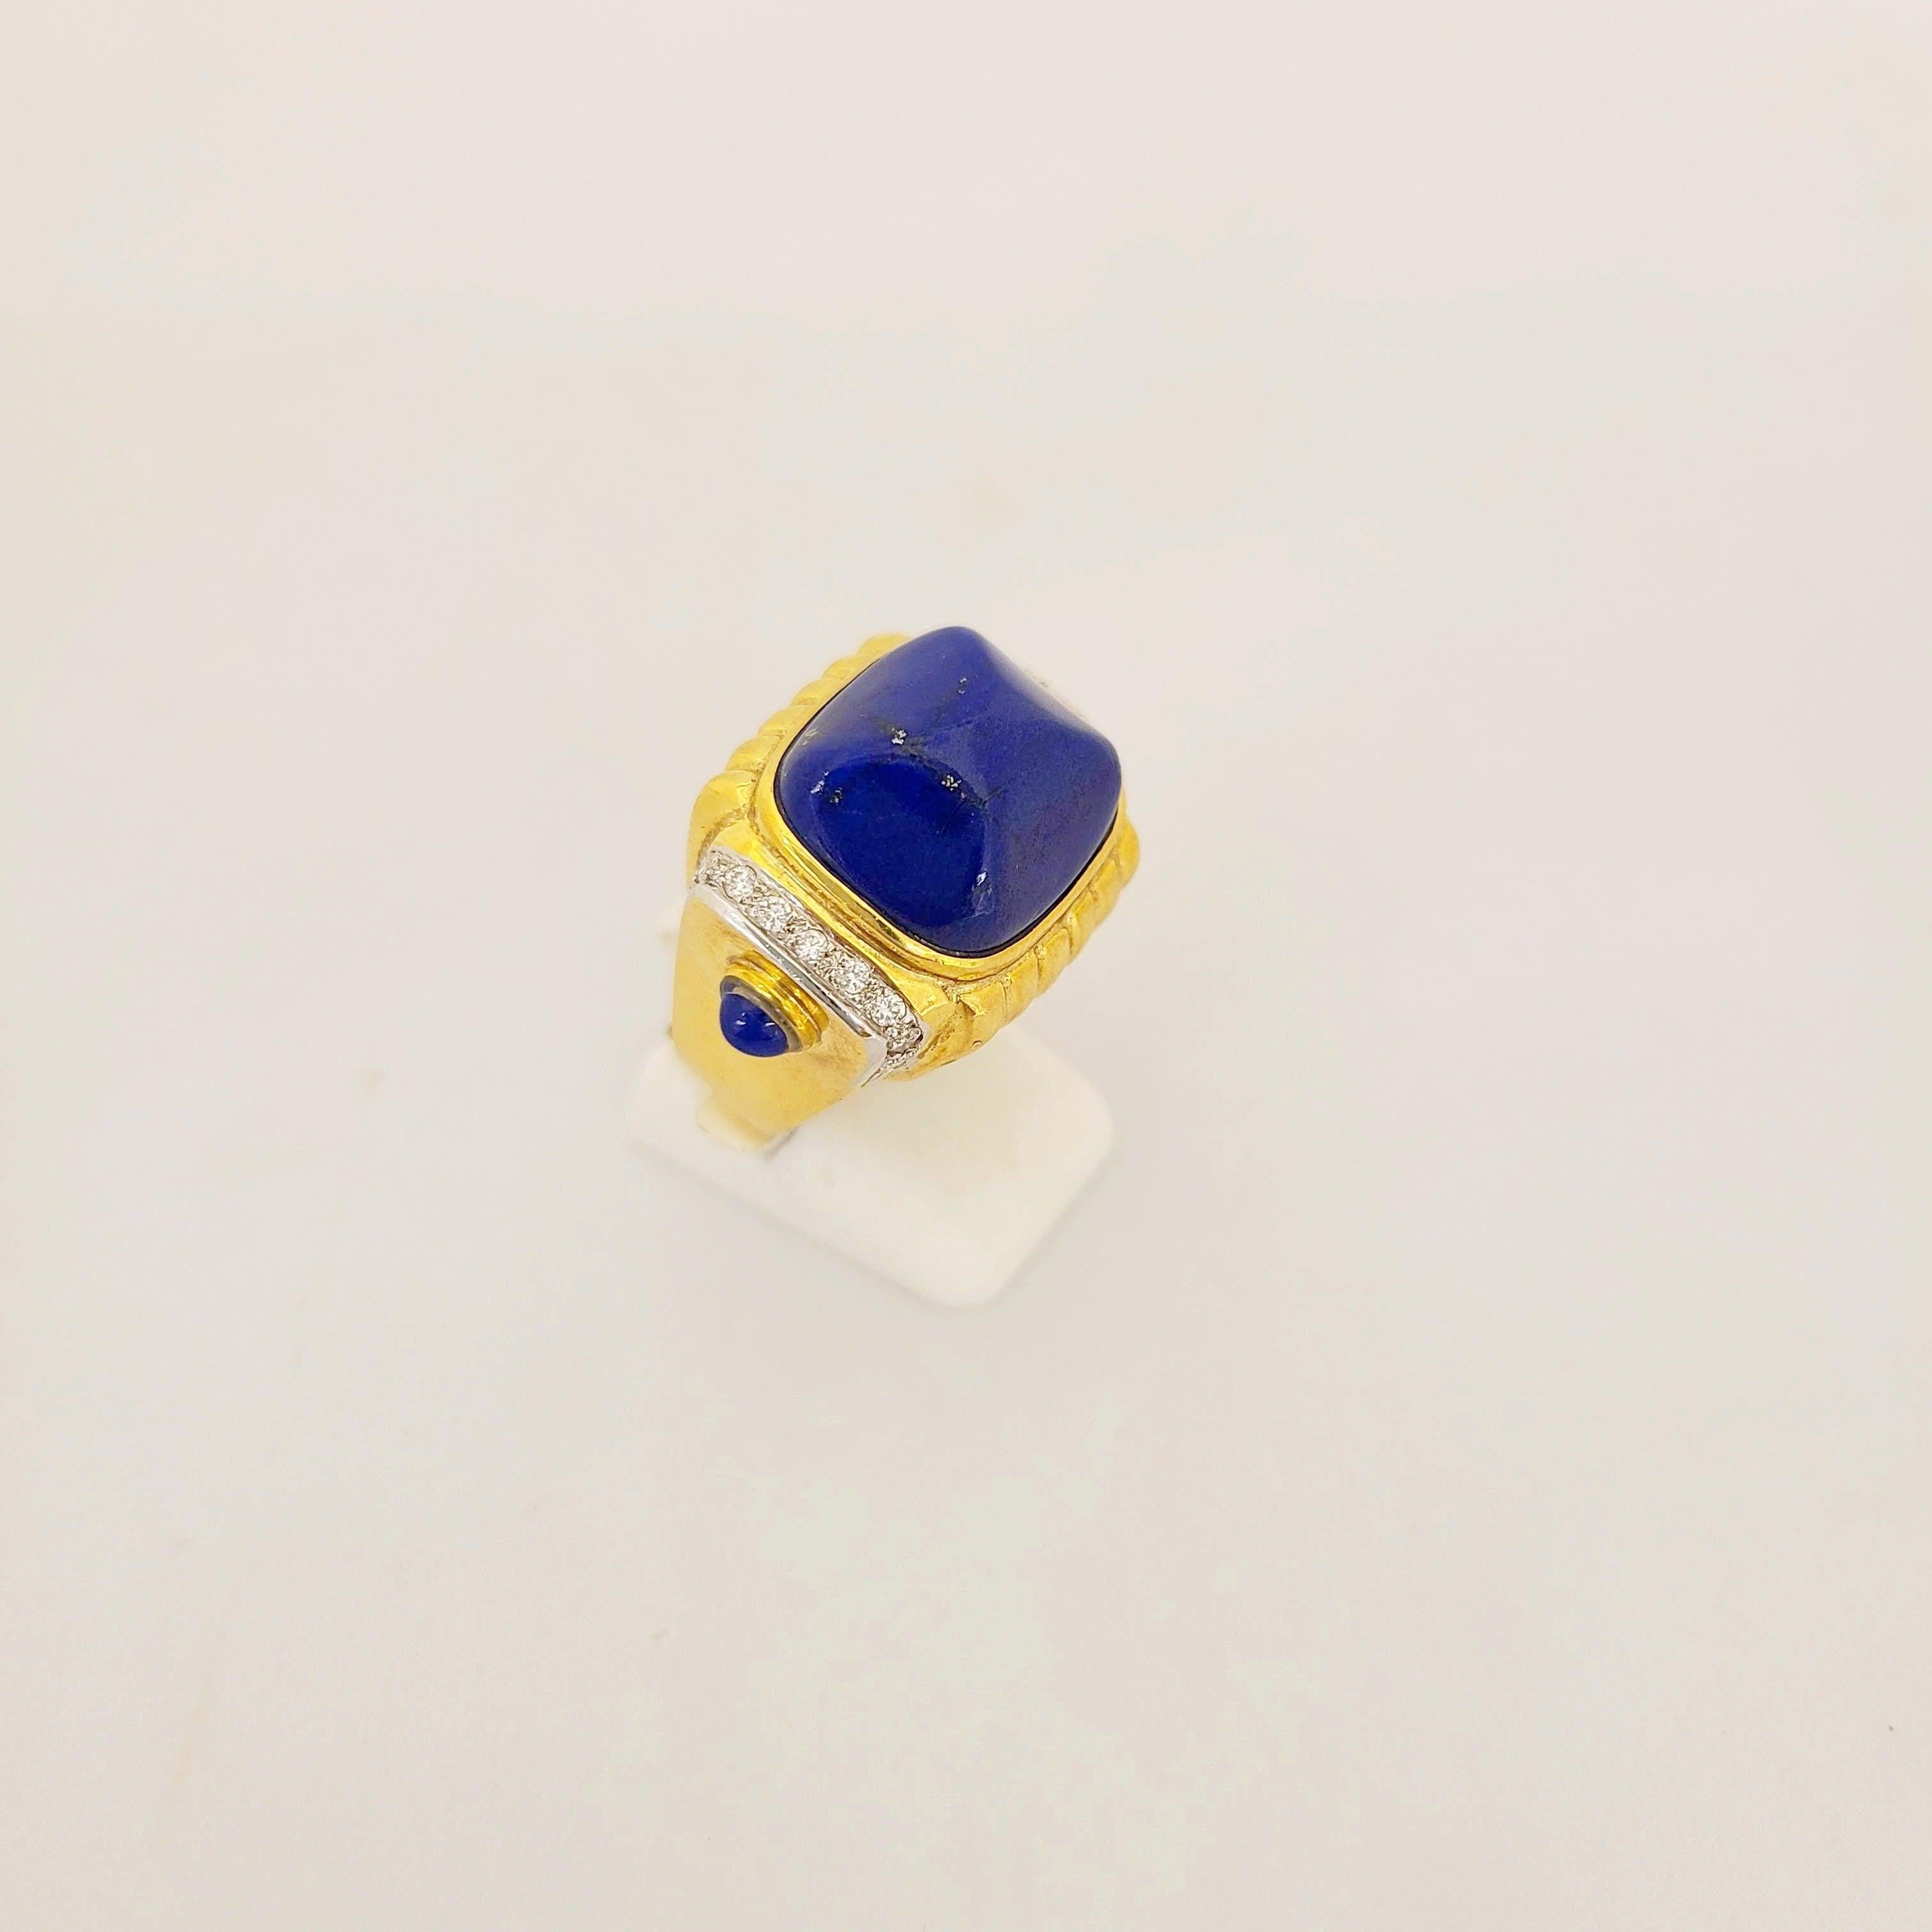 This 18karat yellow gold ring, by Cellini Jewelers NYC, is designed with a large Lapis Lazuli sugarloaf cabochon center. The ring is accented with 0.30 cts. of  round diamonds and 2 smaller lapis cabs.
Stamped 750
Ring size 6.5
Sizing options are